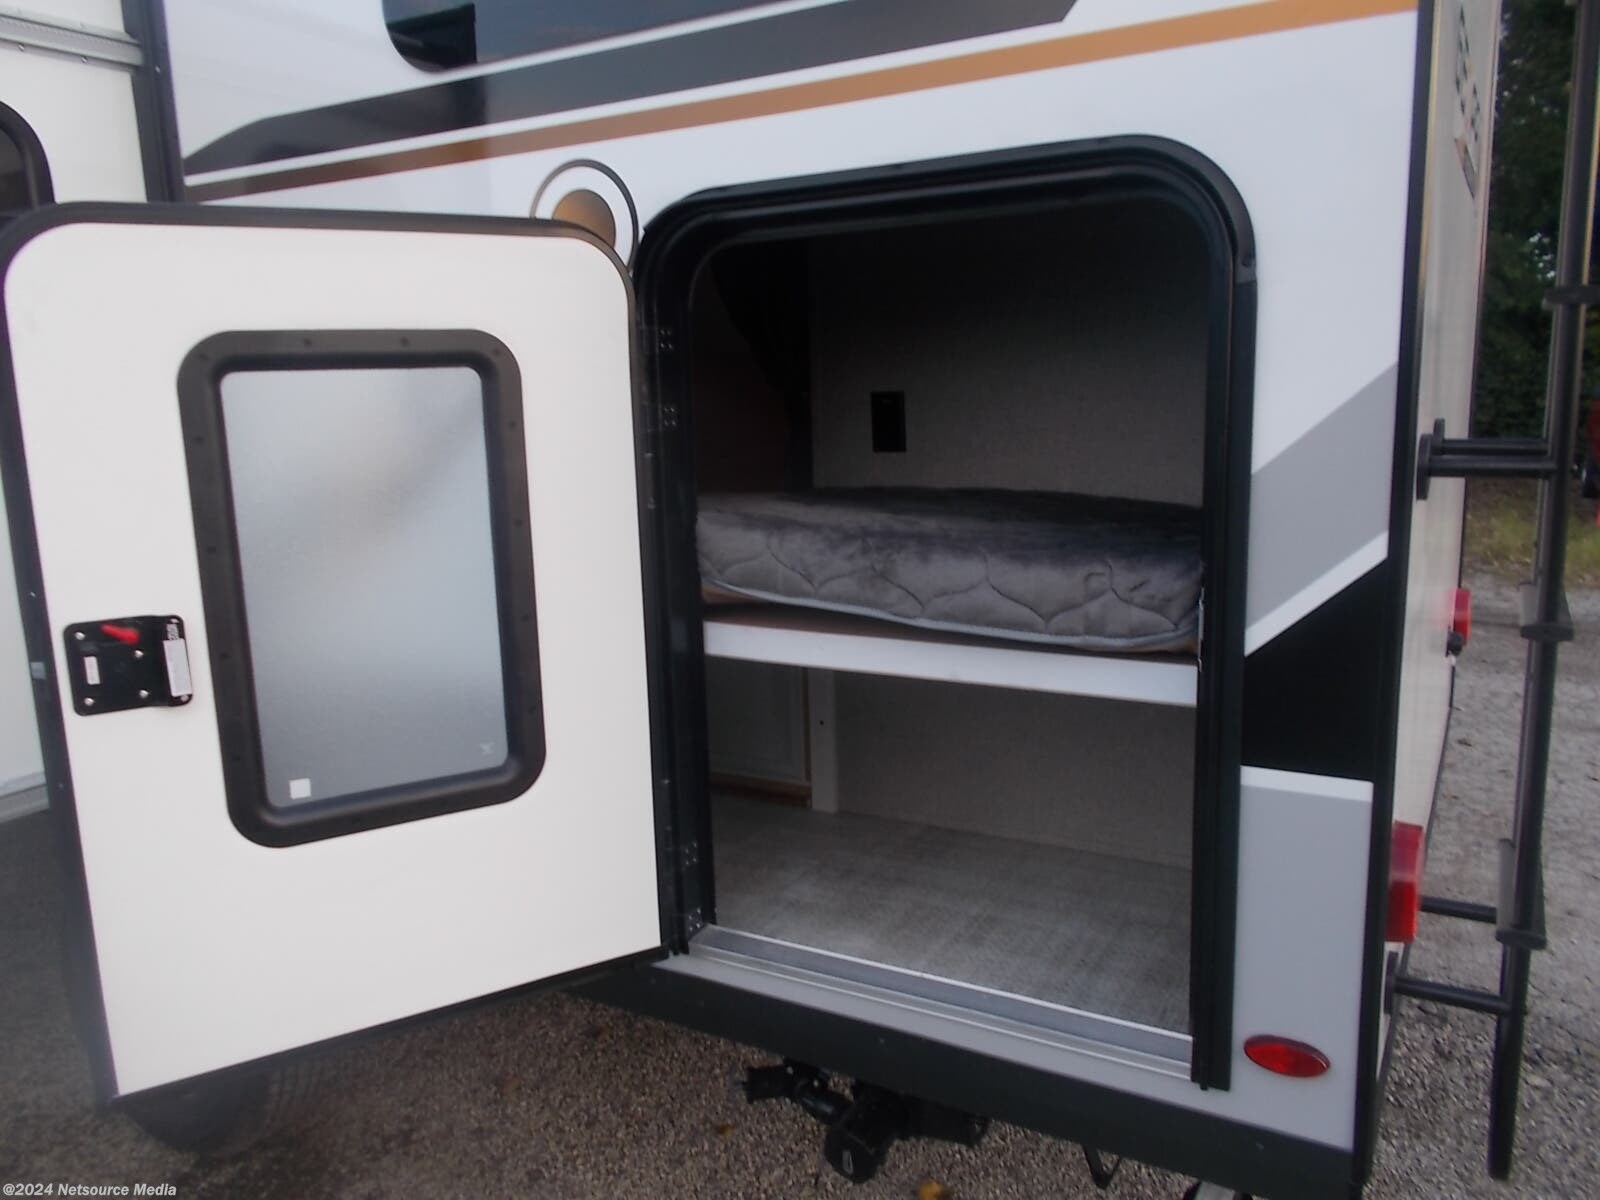 2021 Forest River Rockwood Geo Pro G20BHS RV for Sale in ...